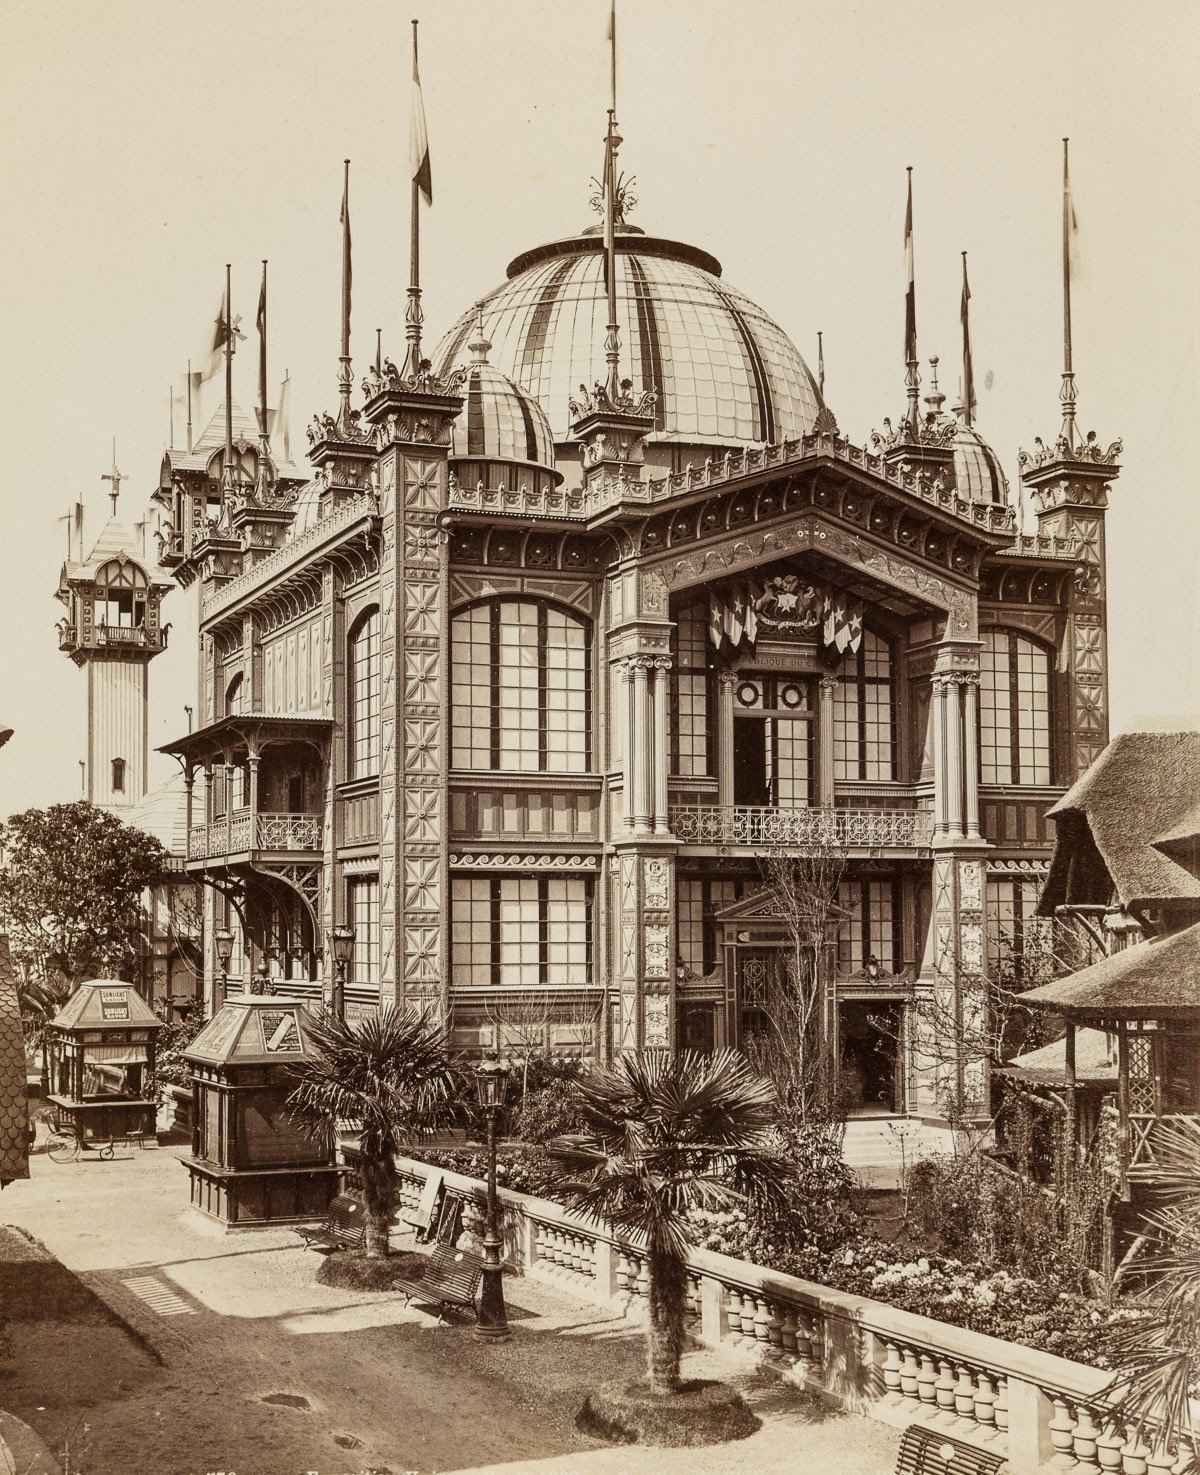 The pavilion of Chile